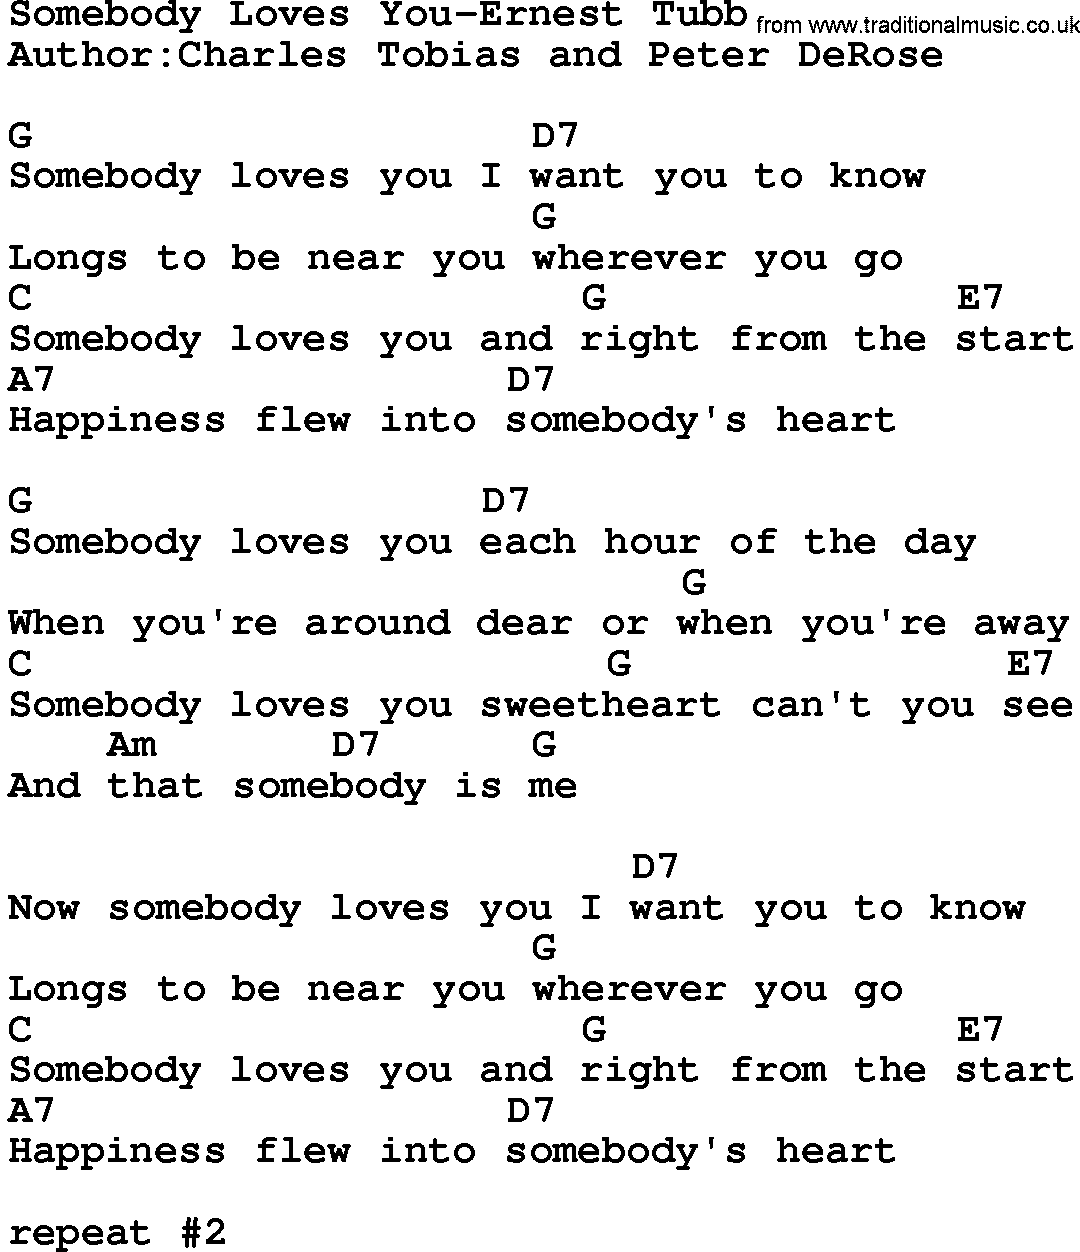 Country music song: Somebody Loves You-Ernest Tubb lyrics and chords